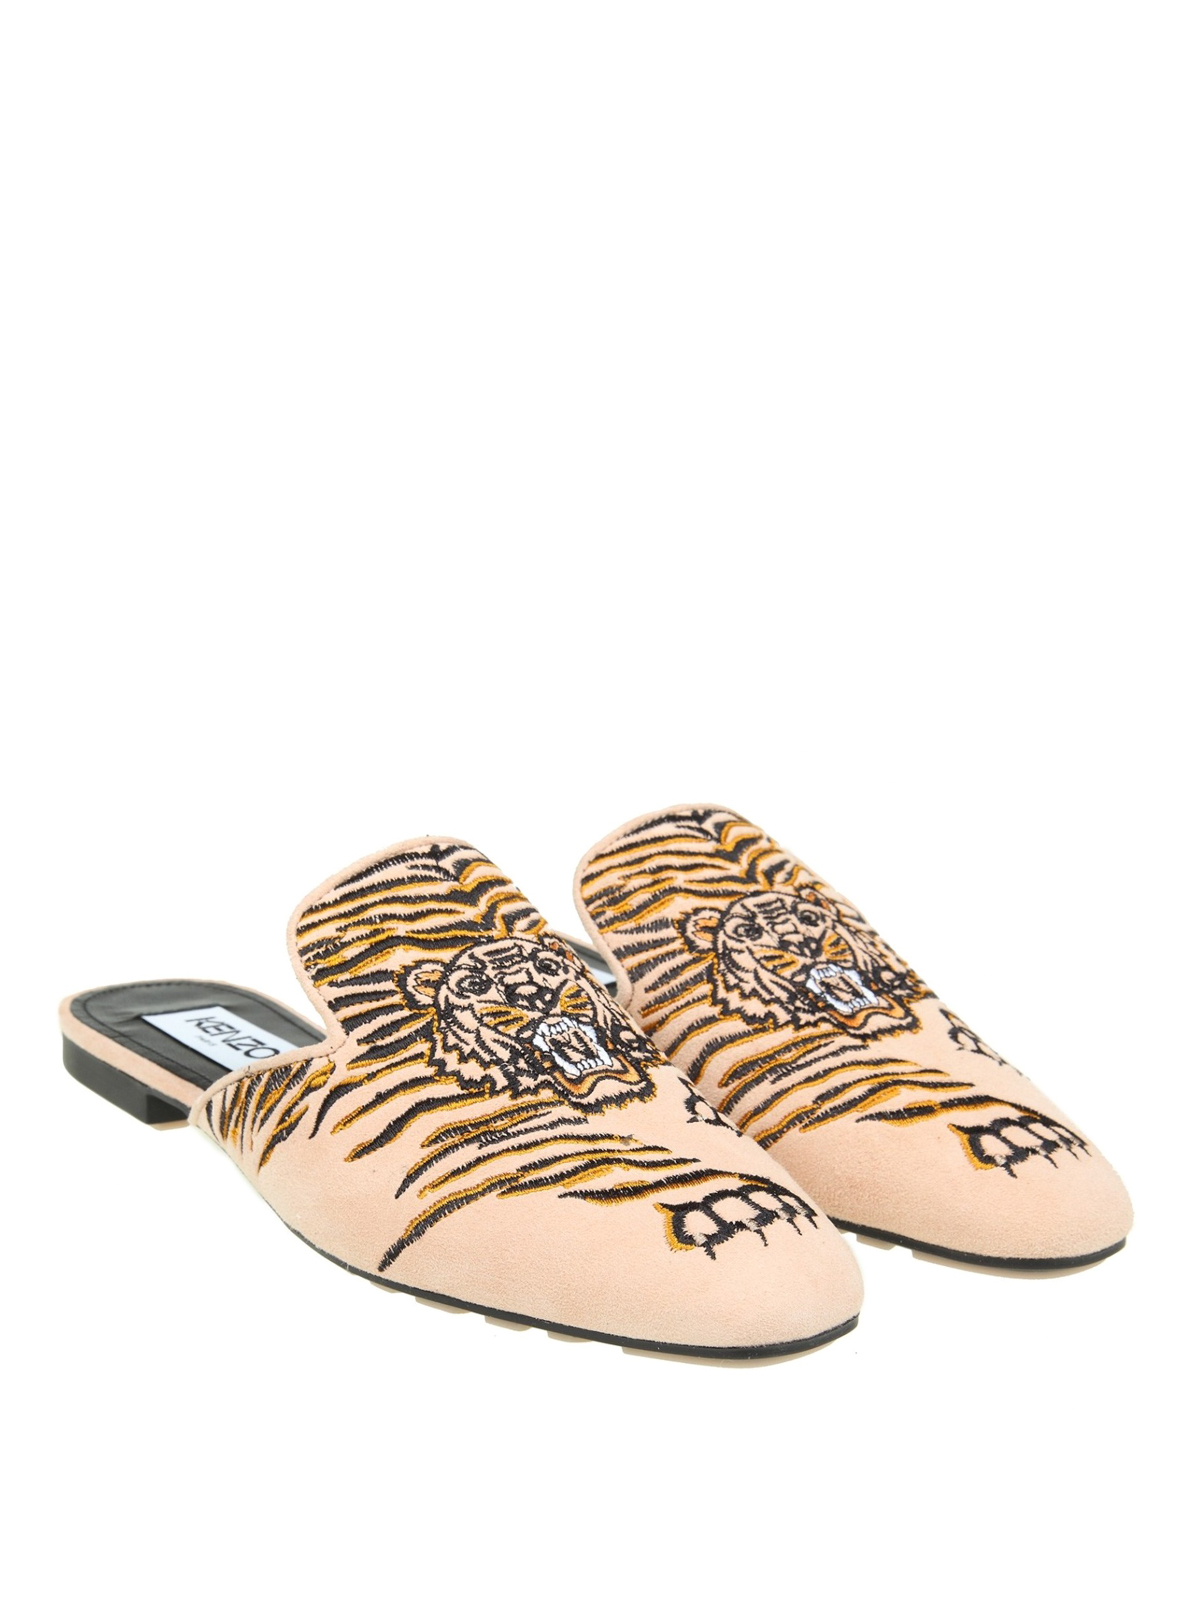 Kenzo - Custer tiger embroidery mules 